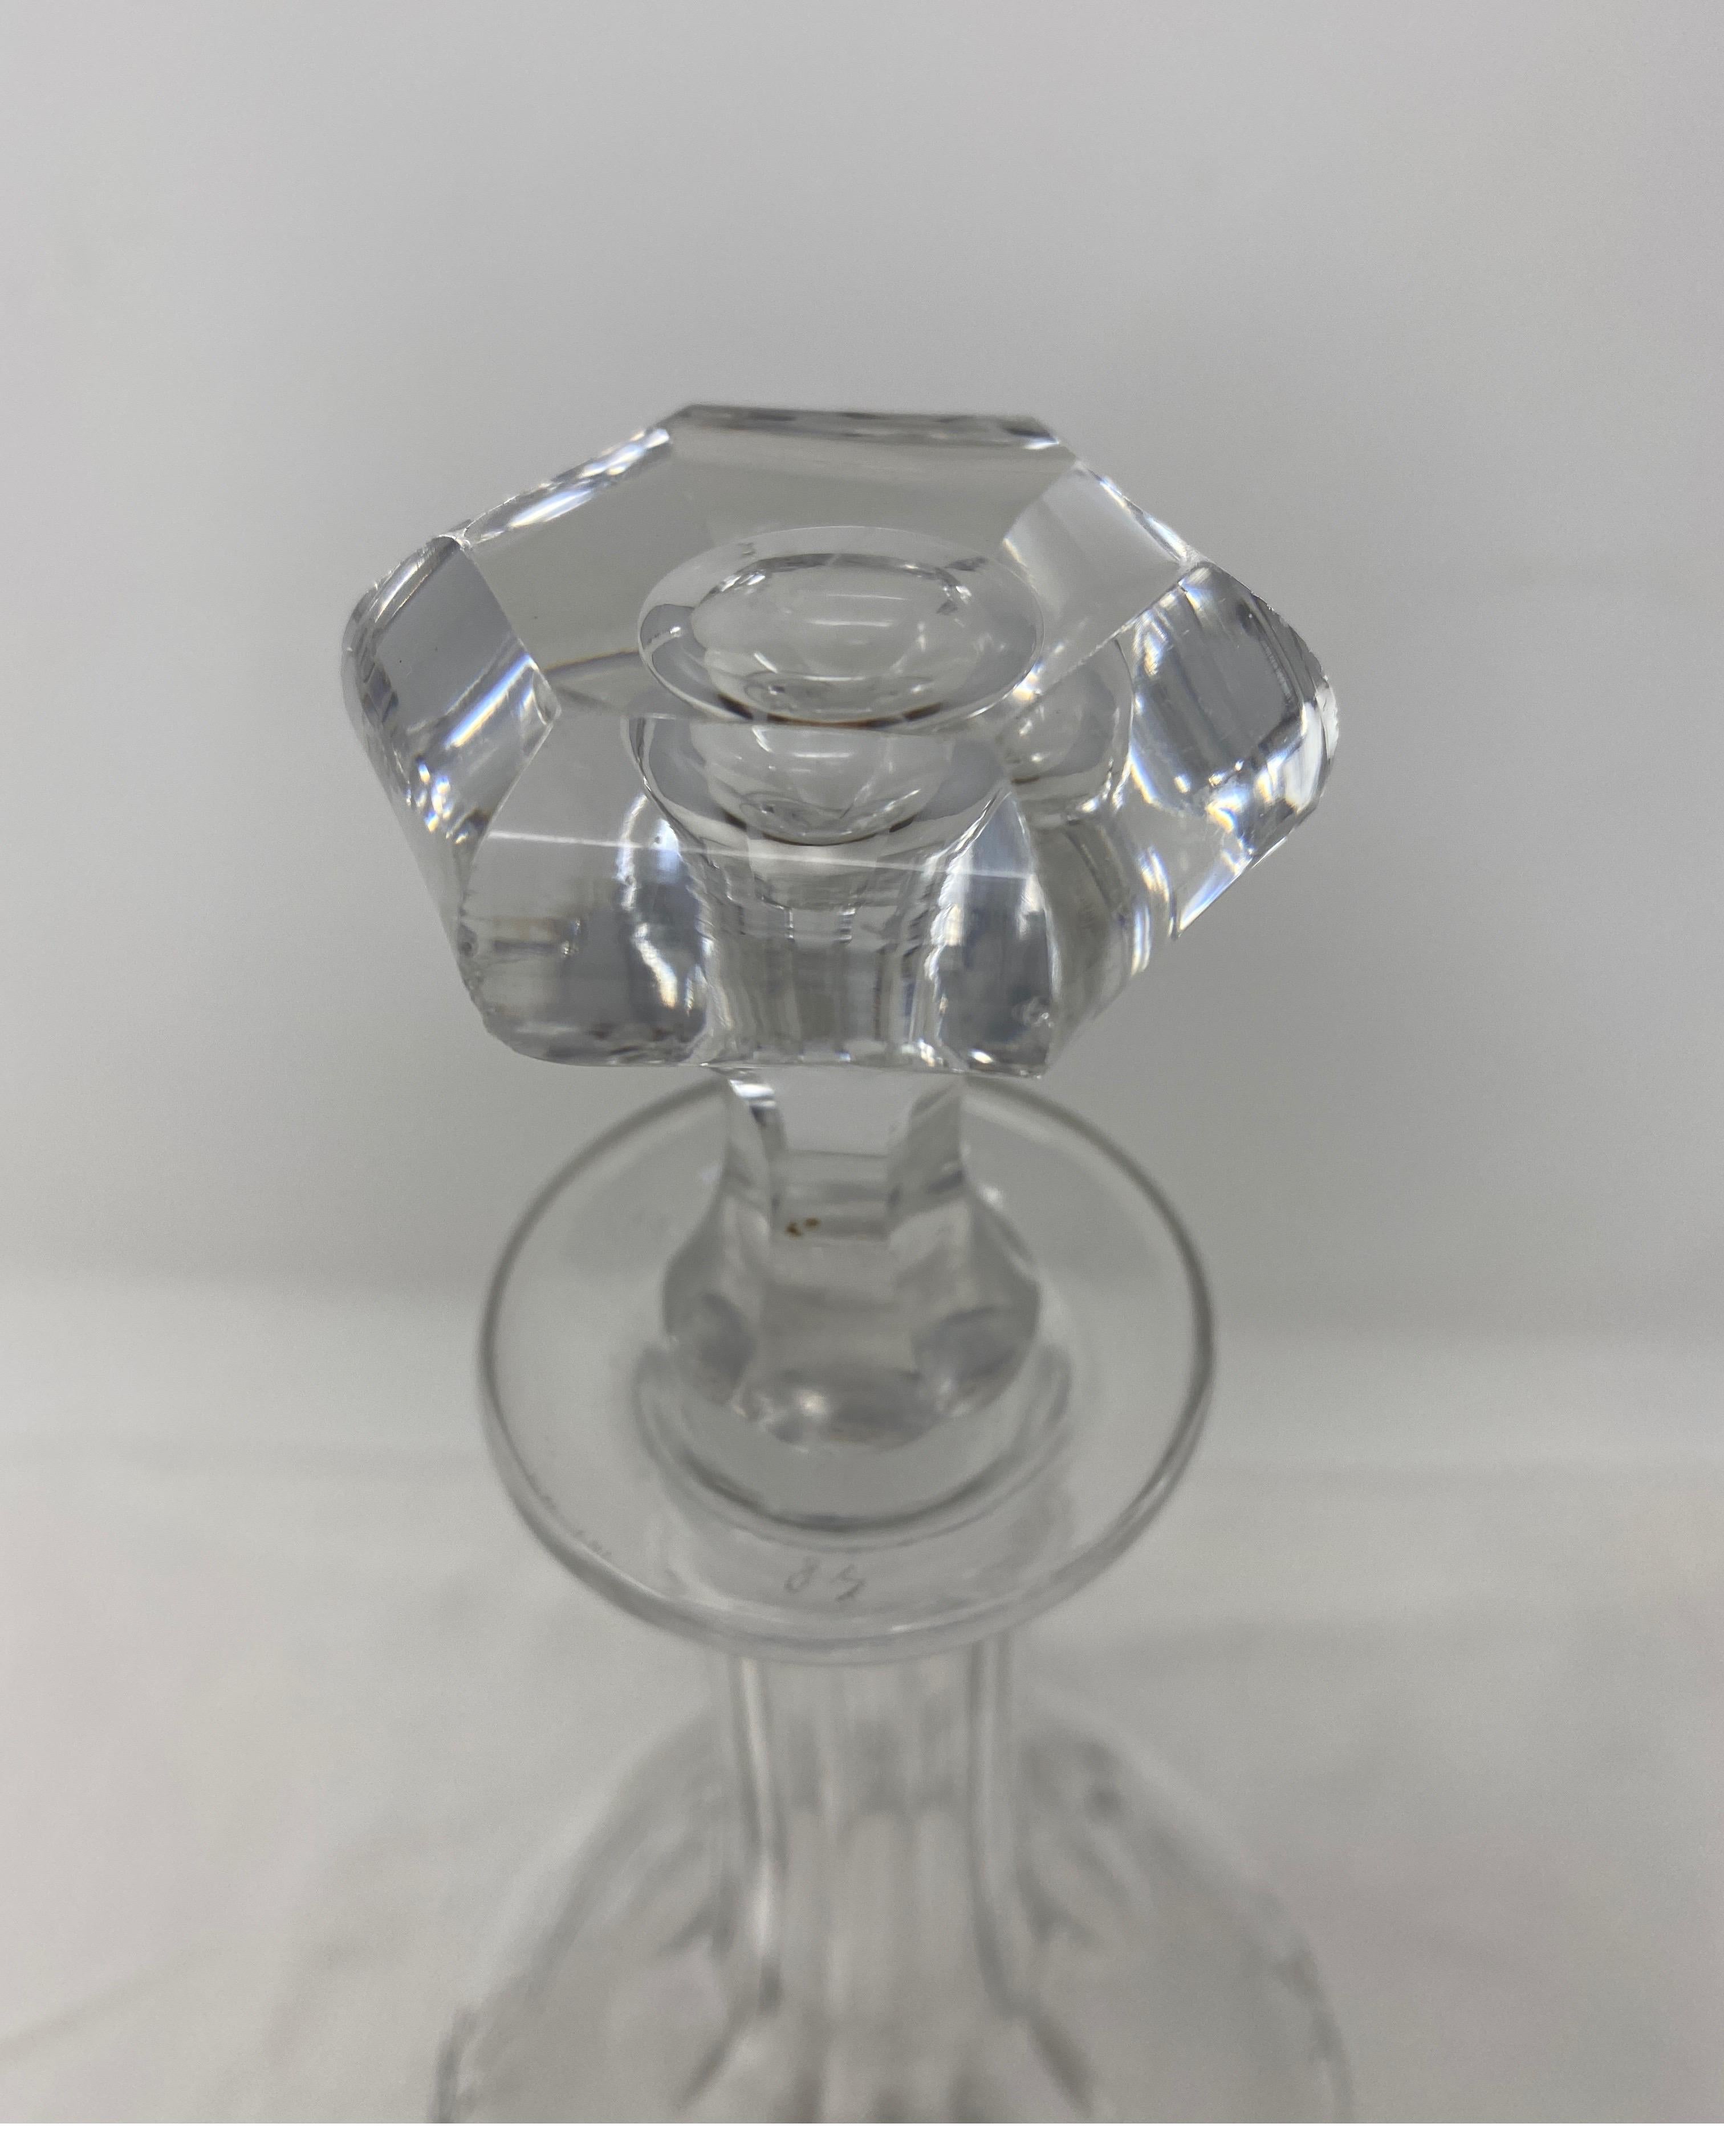 Antique French decanter with stopper, 19th century.